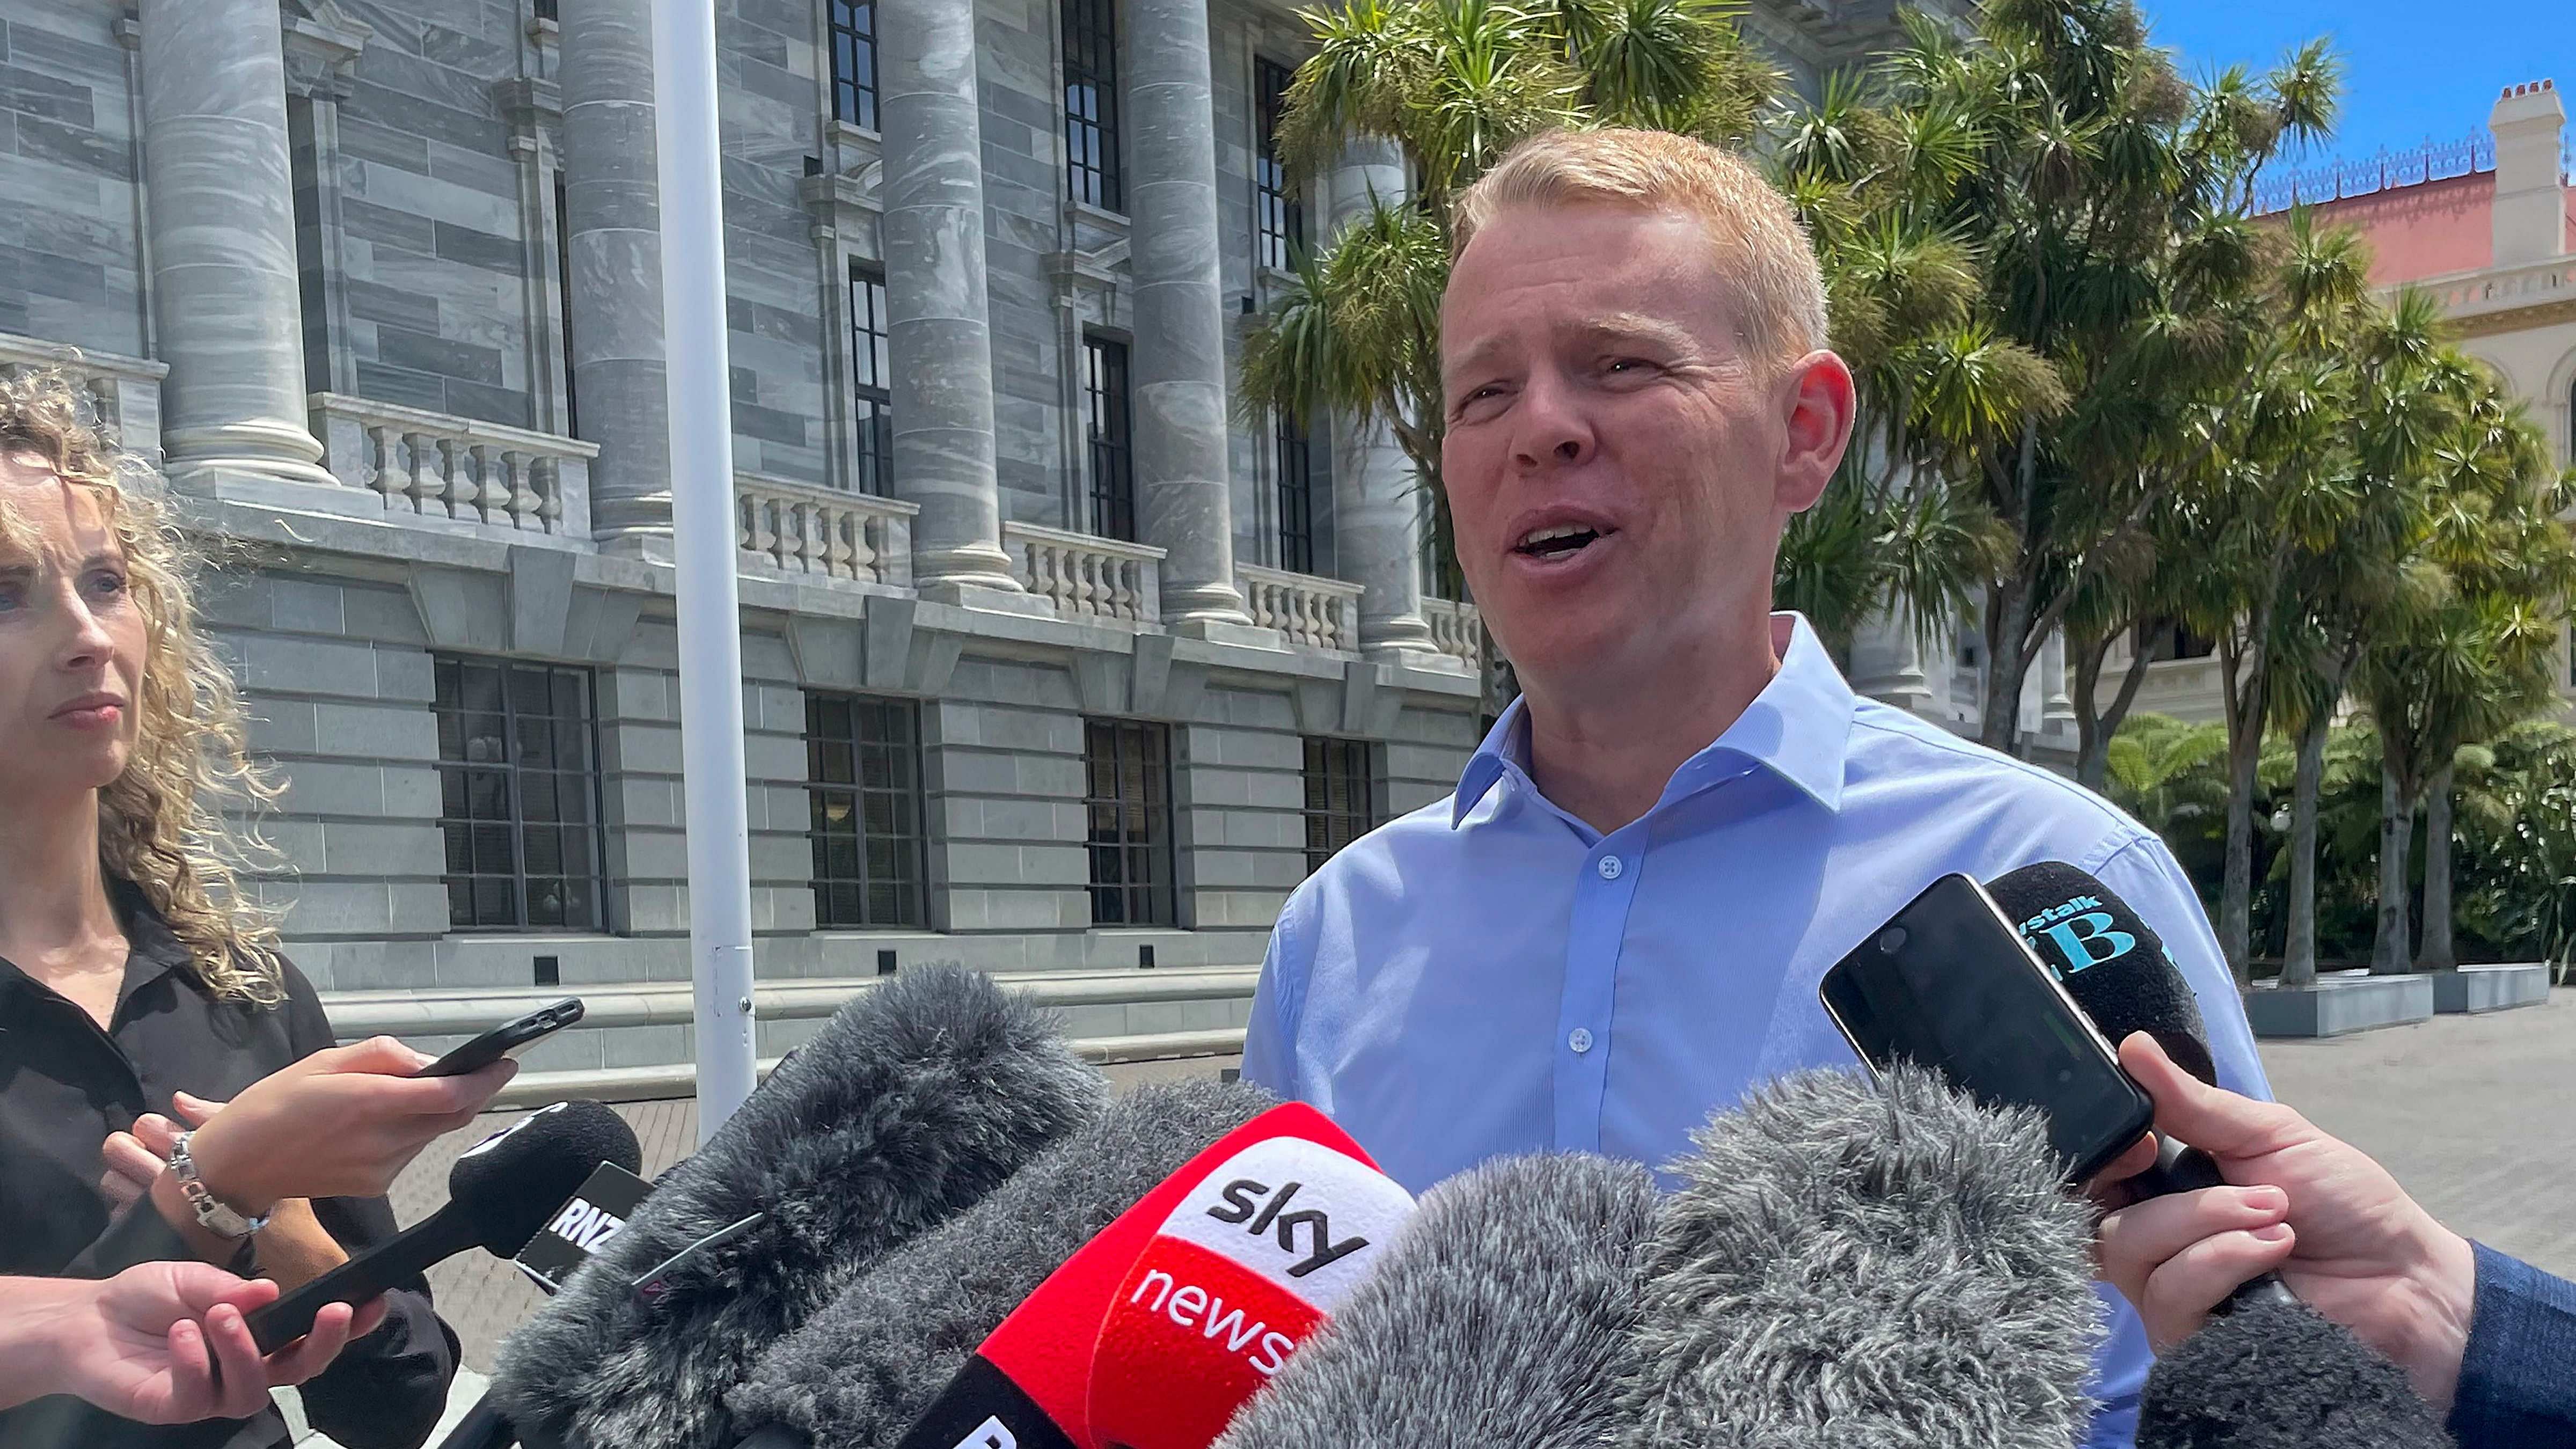 Hipkins is set to become New Zealand's next prime minister. Credit: AP Photo